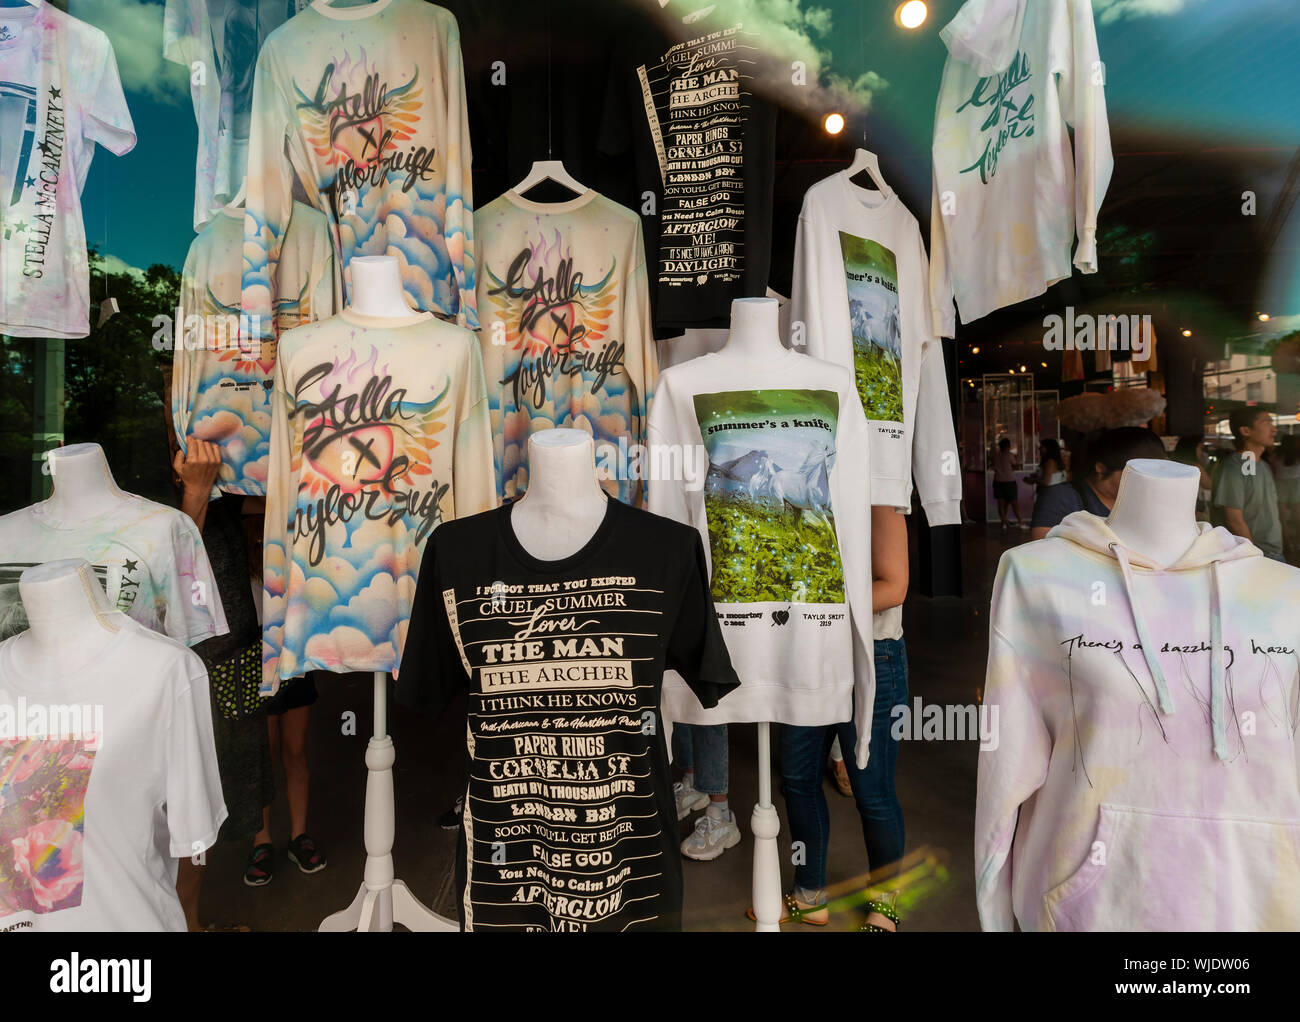 “Merch” in the window of the Taylor Swift pop-up shop in New York on Saturday, August 24, 2019. Swift is selling merchandise created in a collaboration with Stella McCartney tied into her new “Lover” album. Swift will be opening MTV’s VMA (Video Music Awards) show taking place this year in Newark NJ. (© Richard B. Levine) Stock Photo